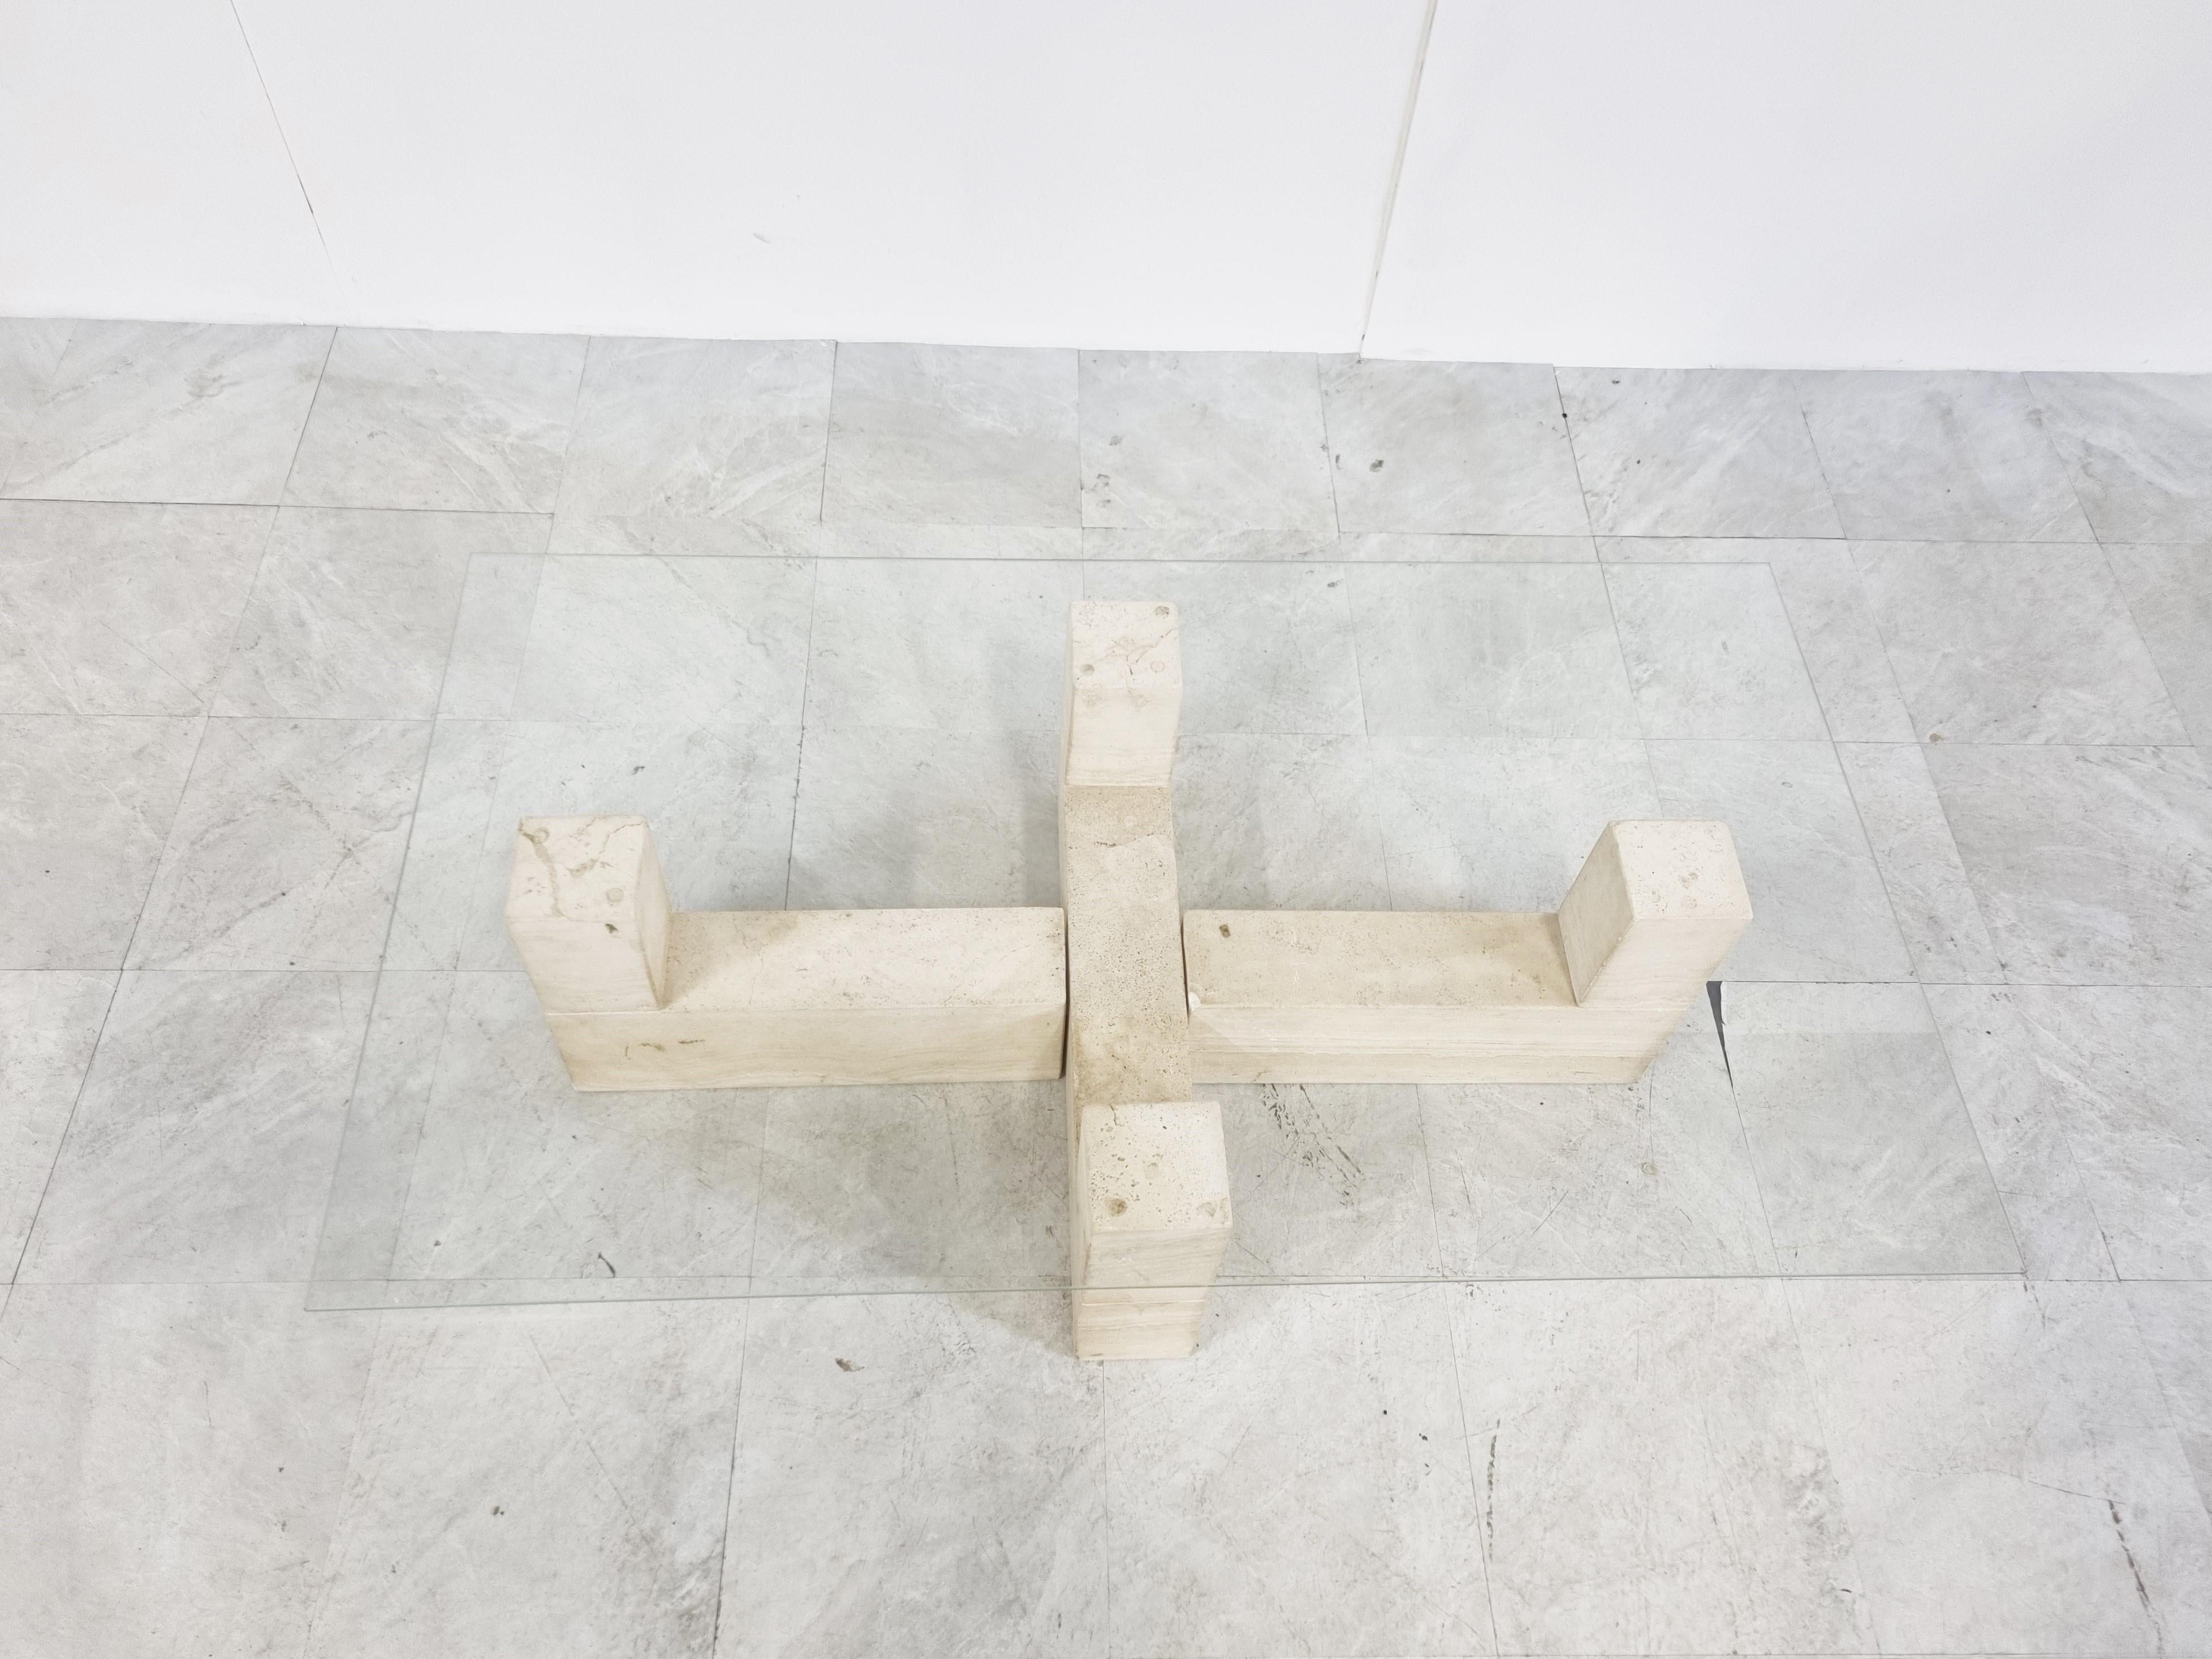 Architectural coffee table with solid travertine bases and a clear glass top.

The modern look/design mixes well with nowadays interiors, especially with the light color of the travertine.

Good condition.

1970s - Italy

The glass top can